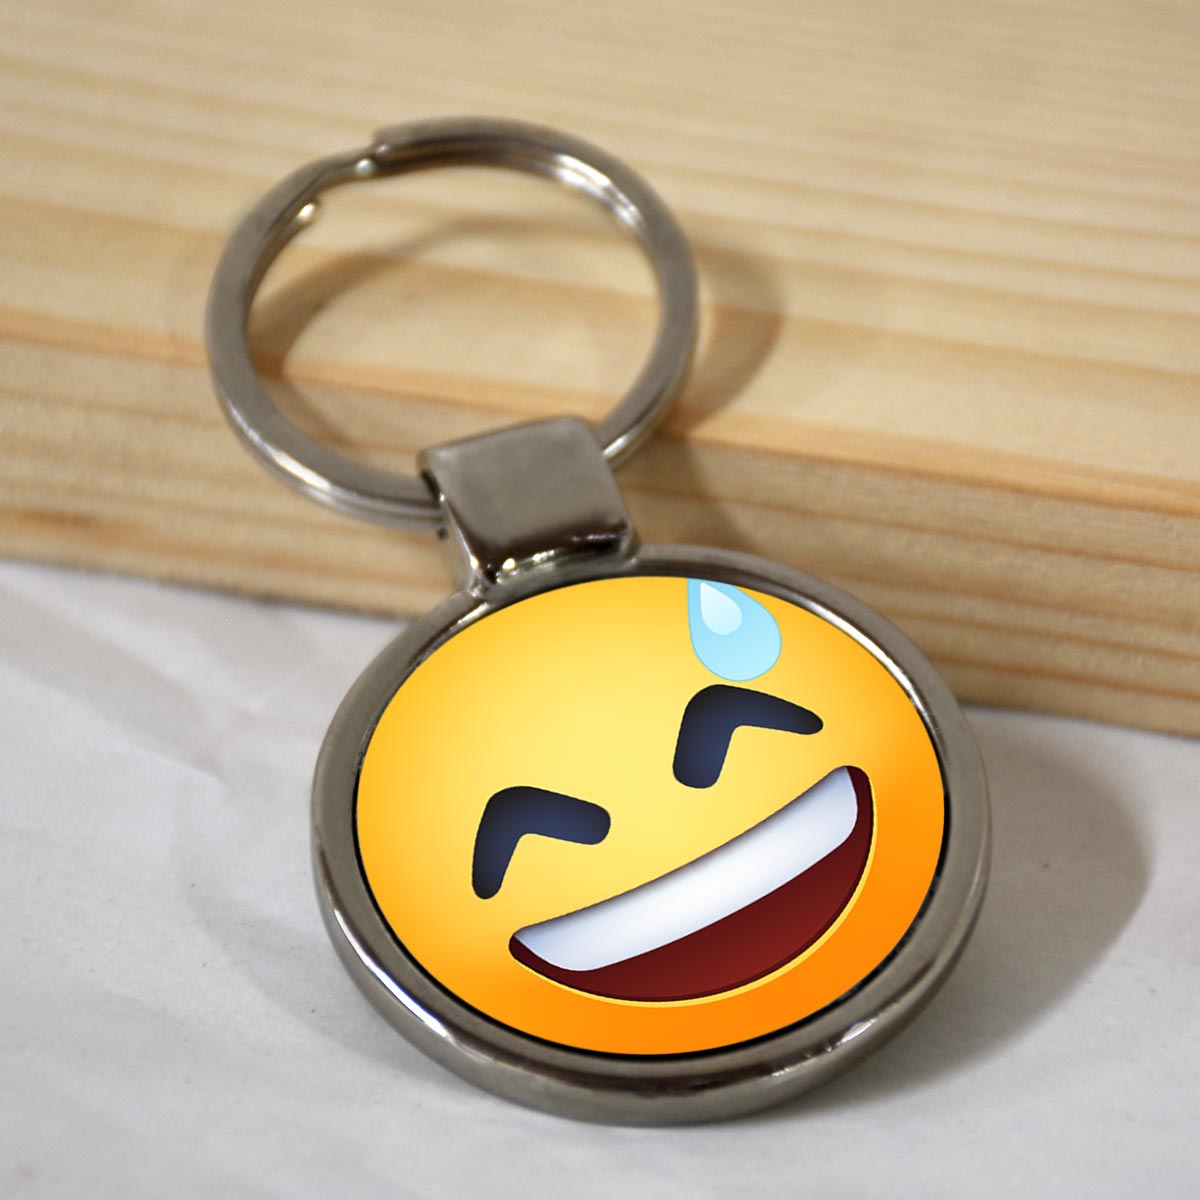 Promotional leather key ring manufacturer & exporter in India